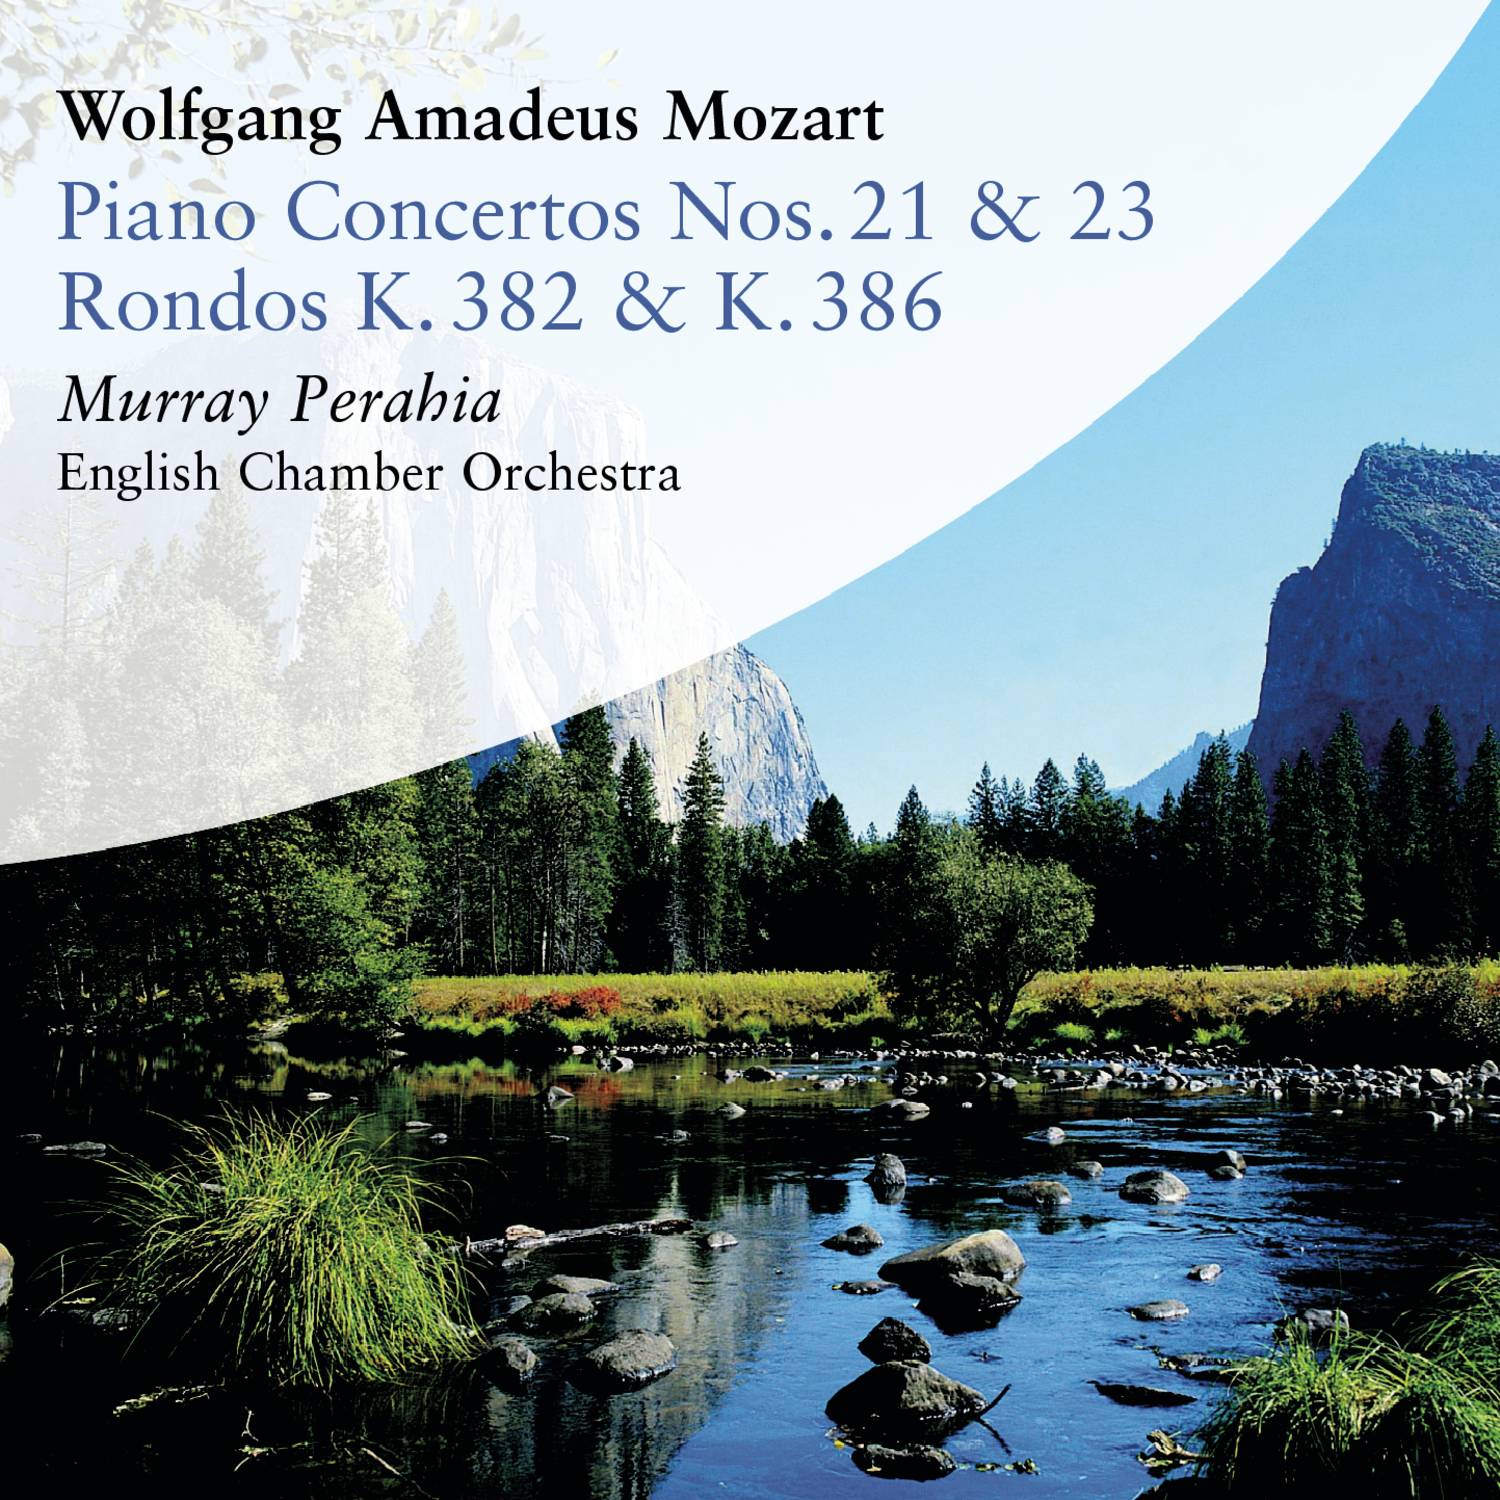 Concerto No. 21 in C Major for Piano and Orchestra, K. 467: II. Andante